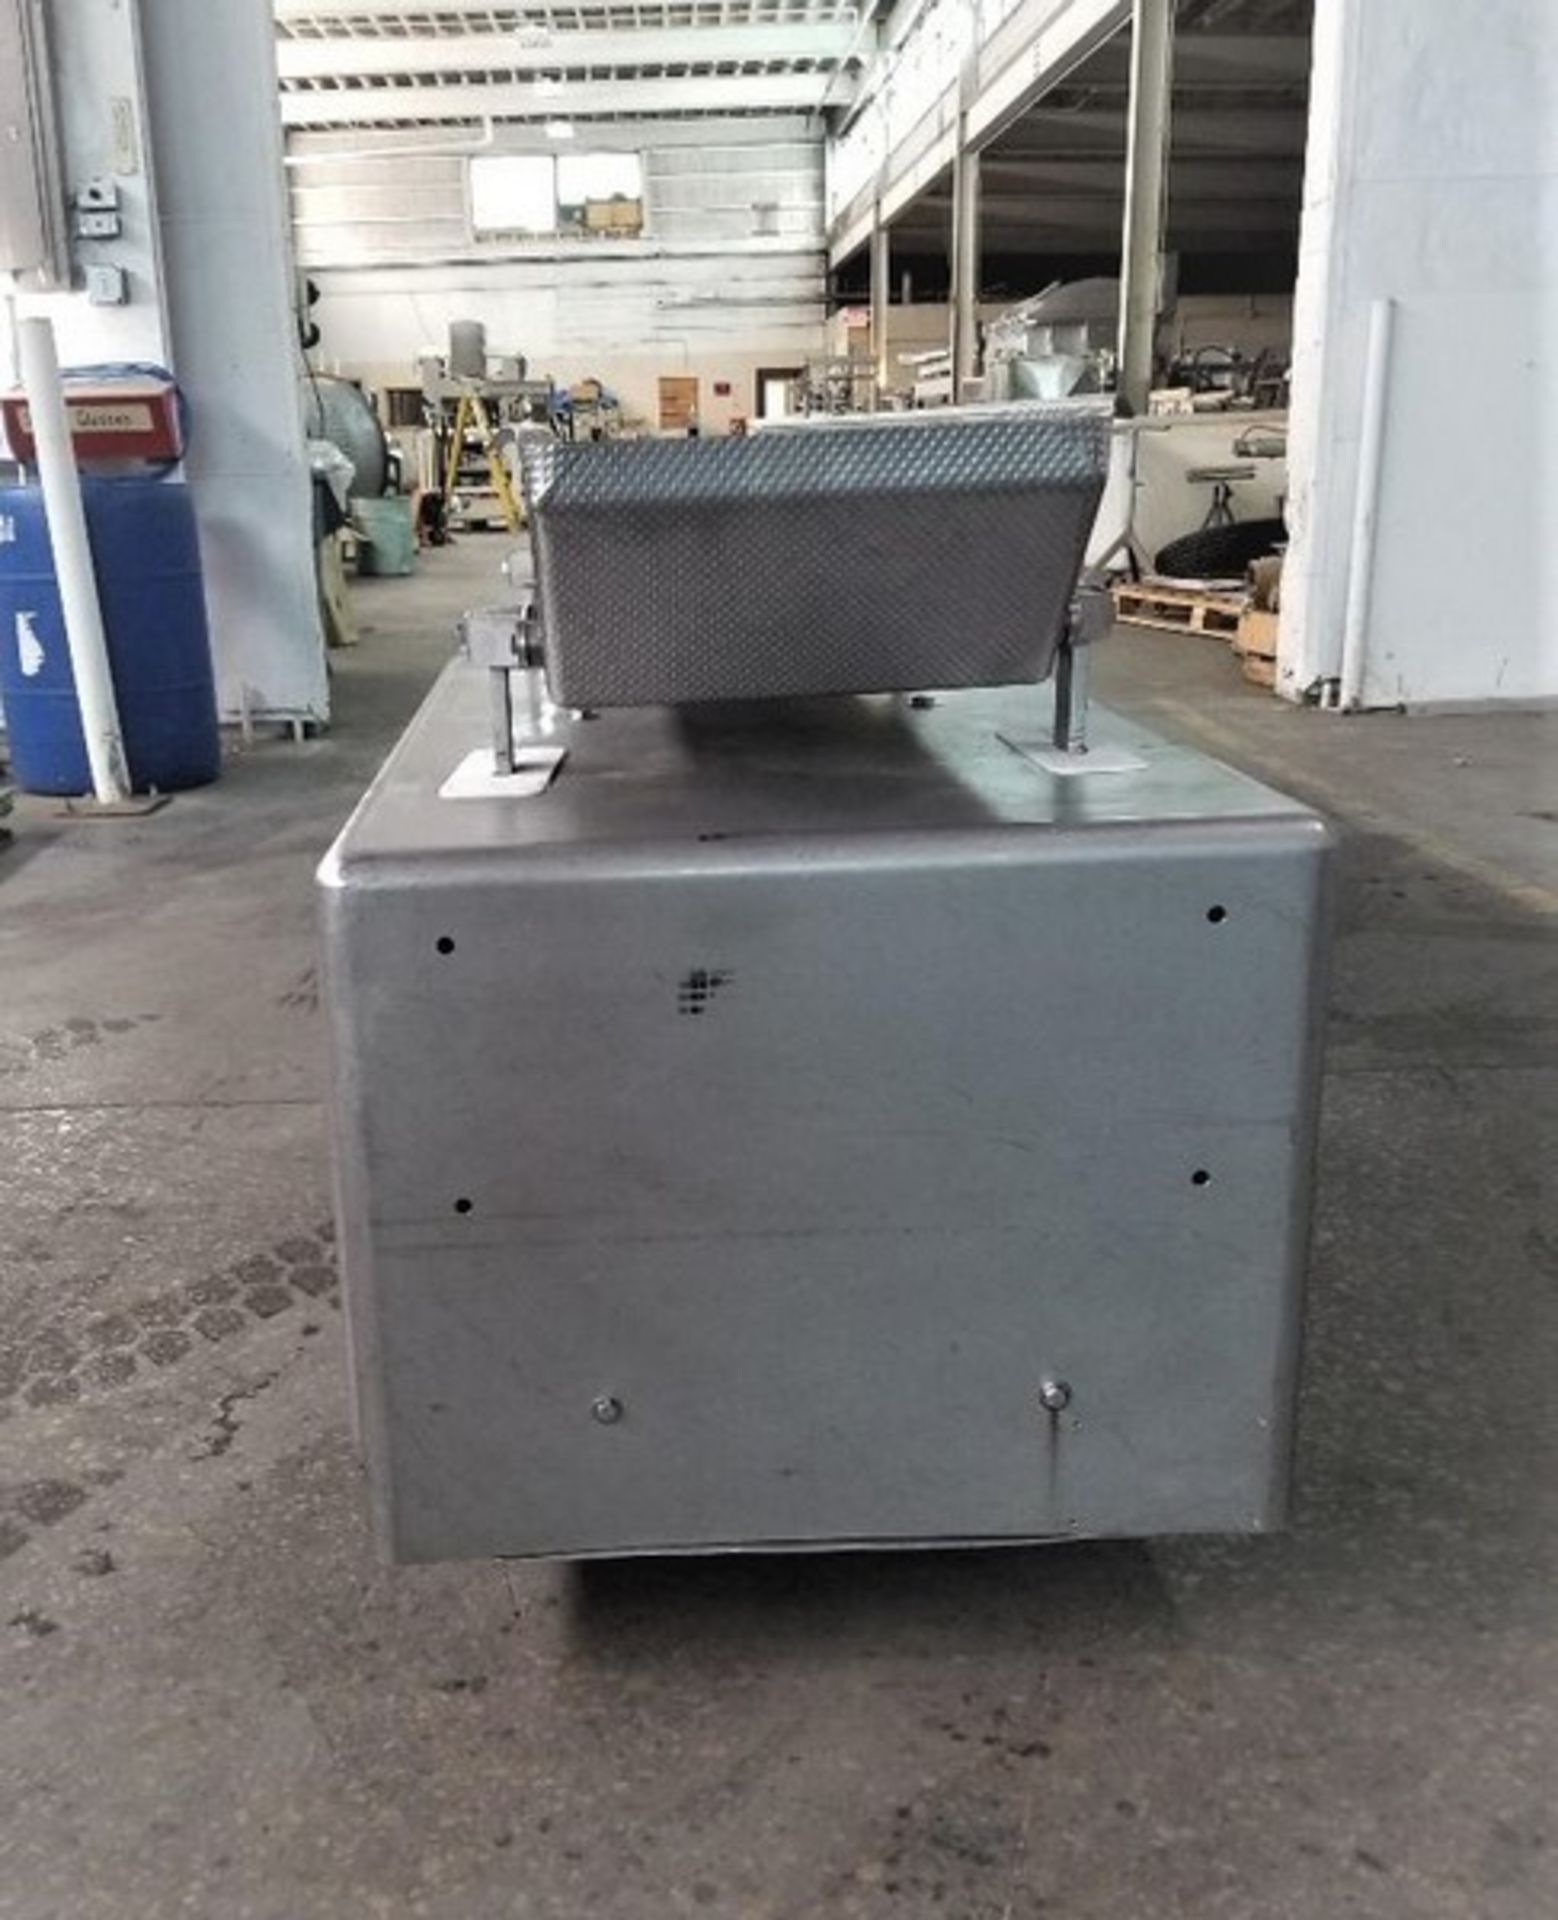 S/S Sanitary Vibratory Scale Feeder, Aprox. 16" W x 112" L. Last used in Food Industry. Unit Removed - Image 6 of 10